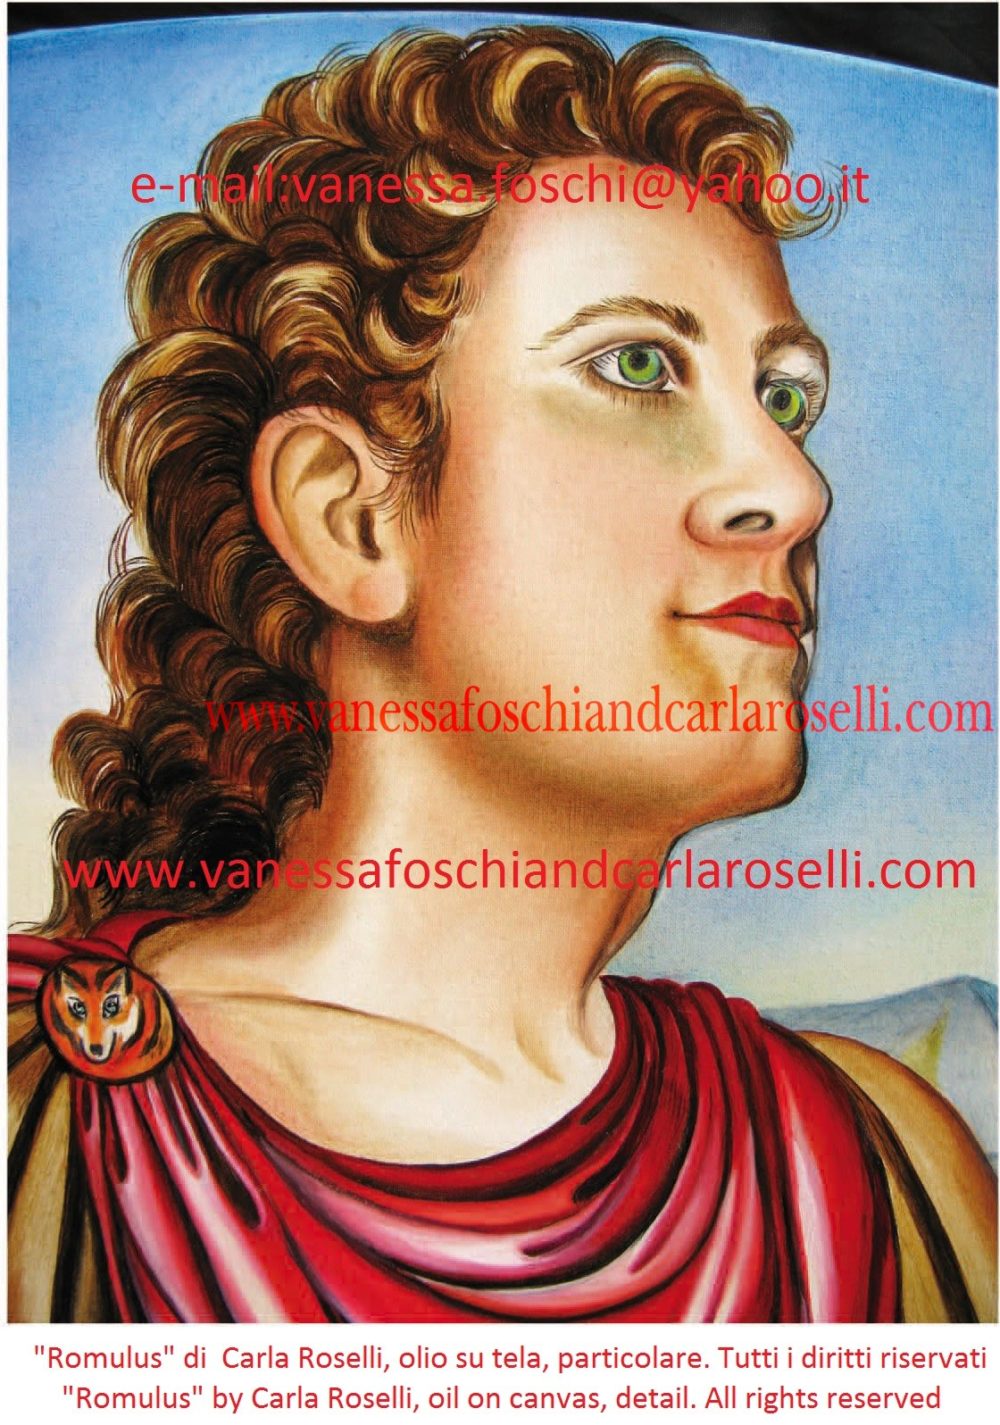 Quirinus Romulus, as painted by Carla Roselli